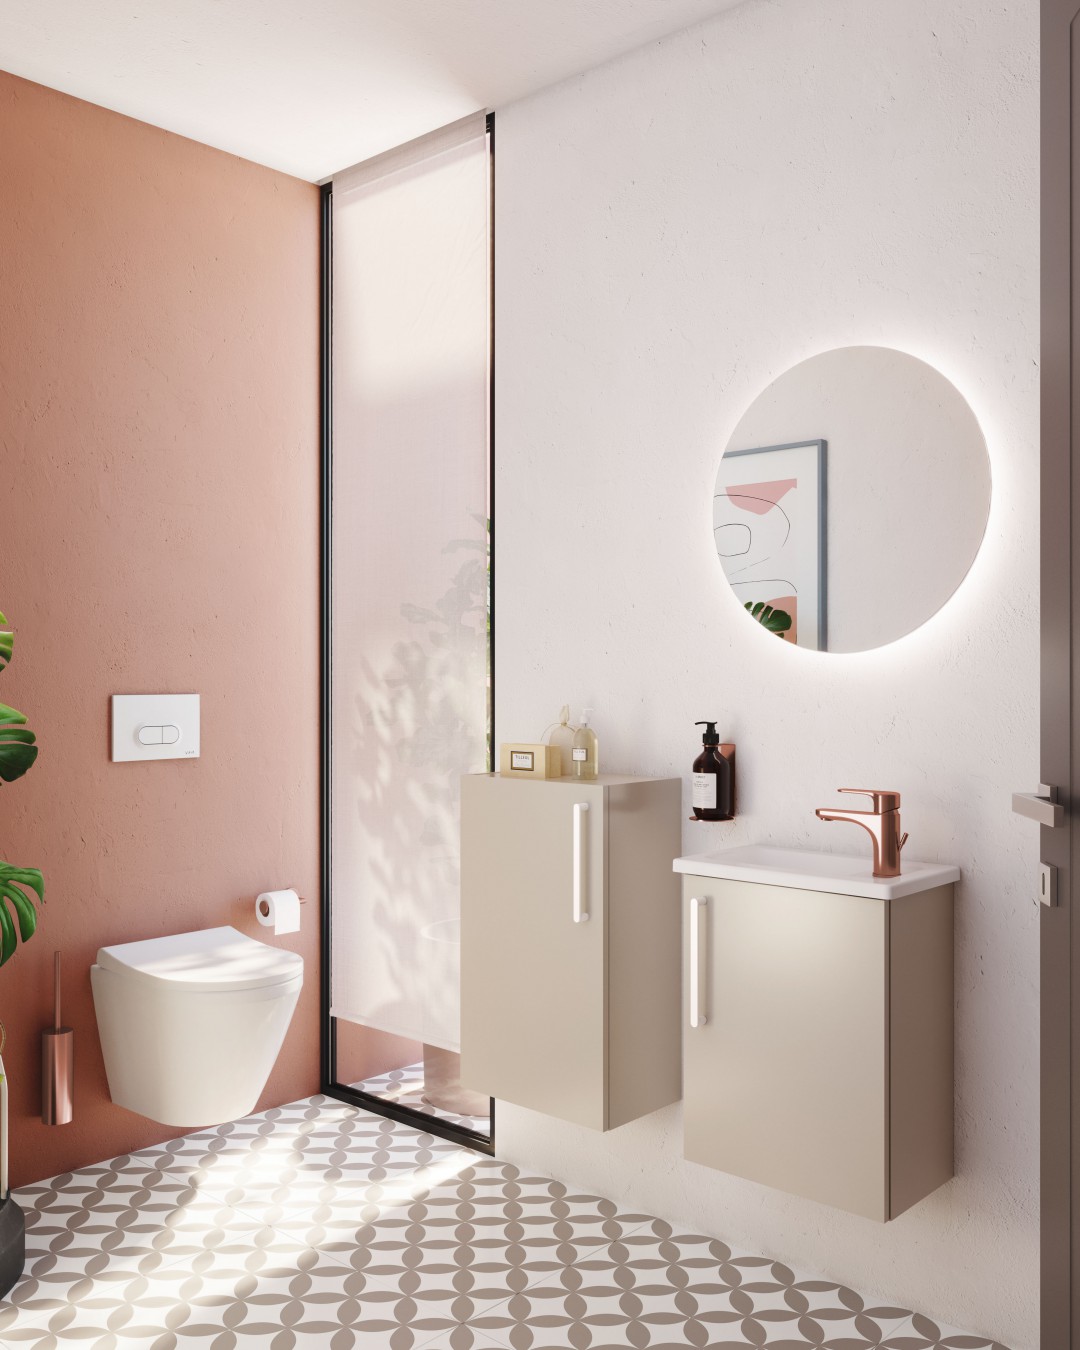 VitrA Root Flat bathrooms with a sophisticated yet minimalist design. Copper taps to compliment a white washbasin and toilet